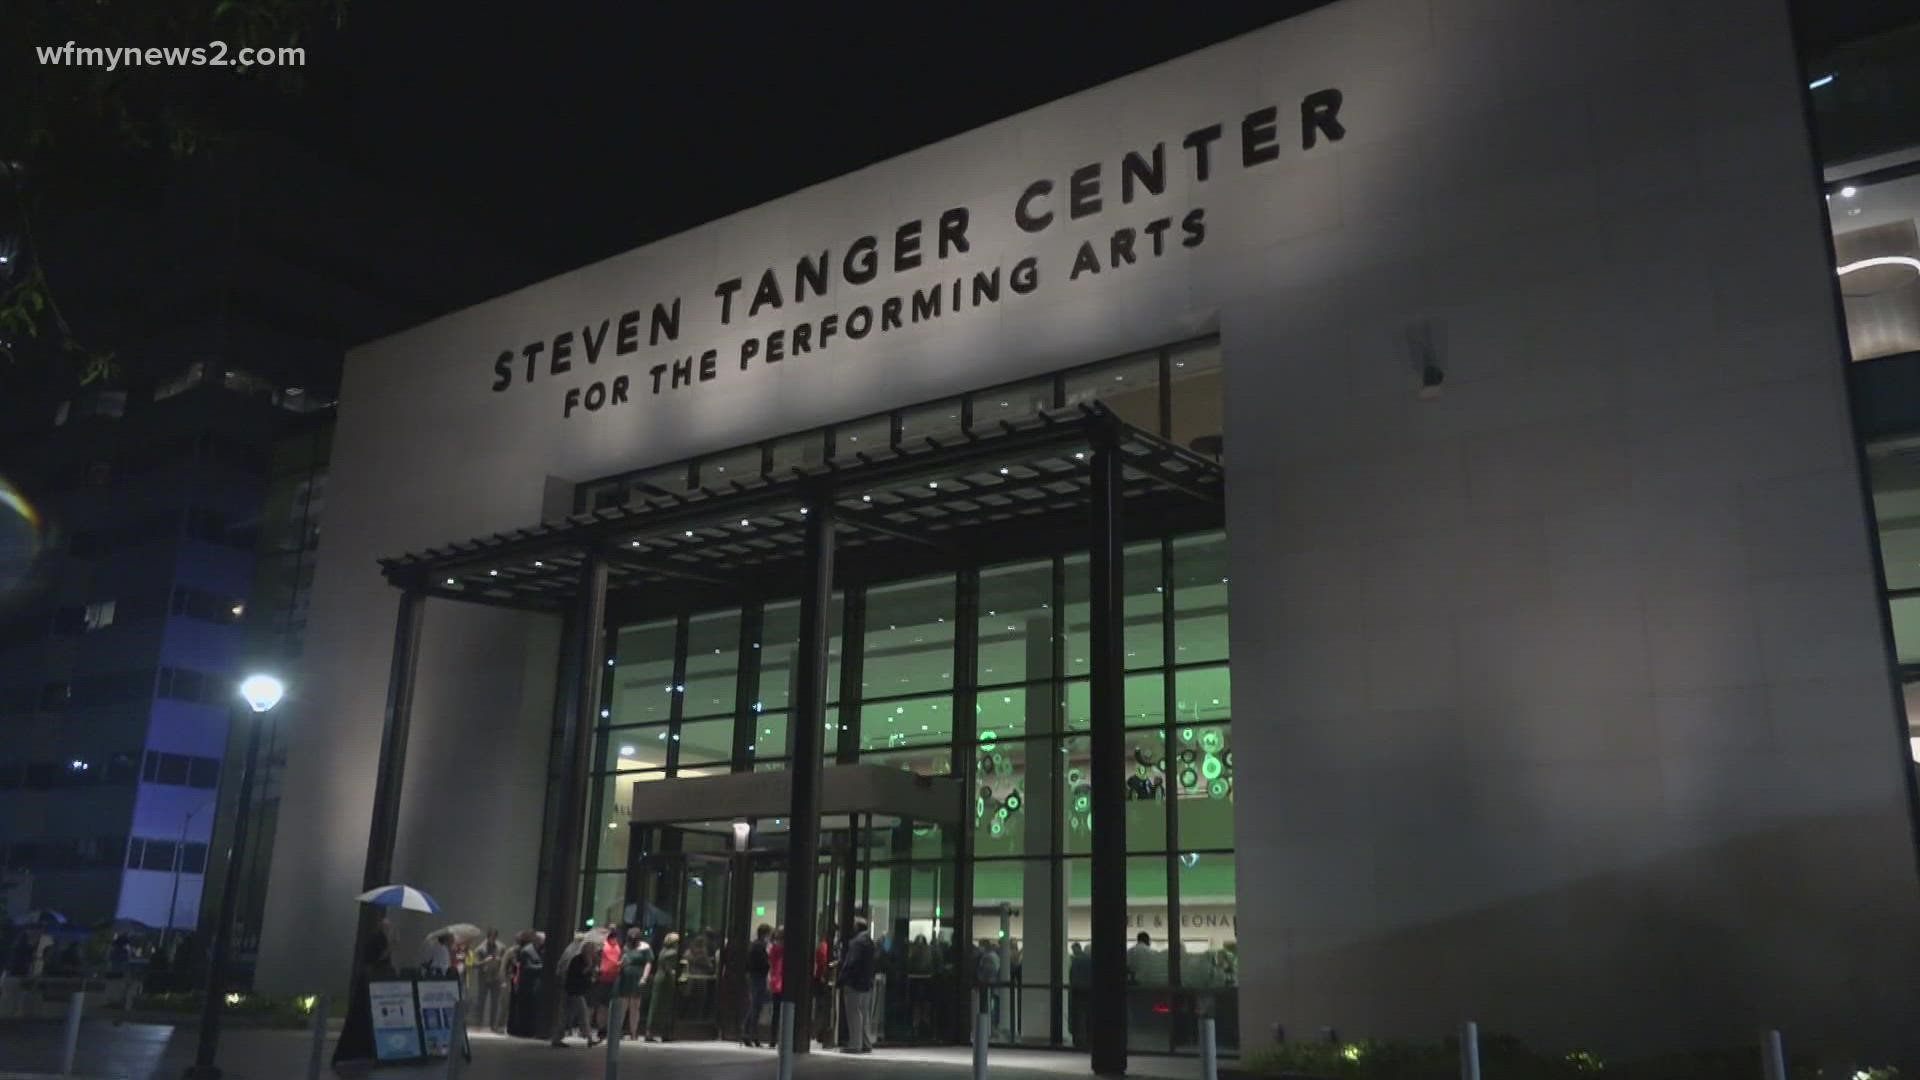 The Tanger Center's first Broadway show brought more people downtown, providing a much-needed boost to the city's economy.